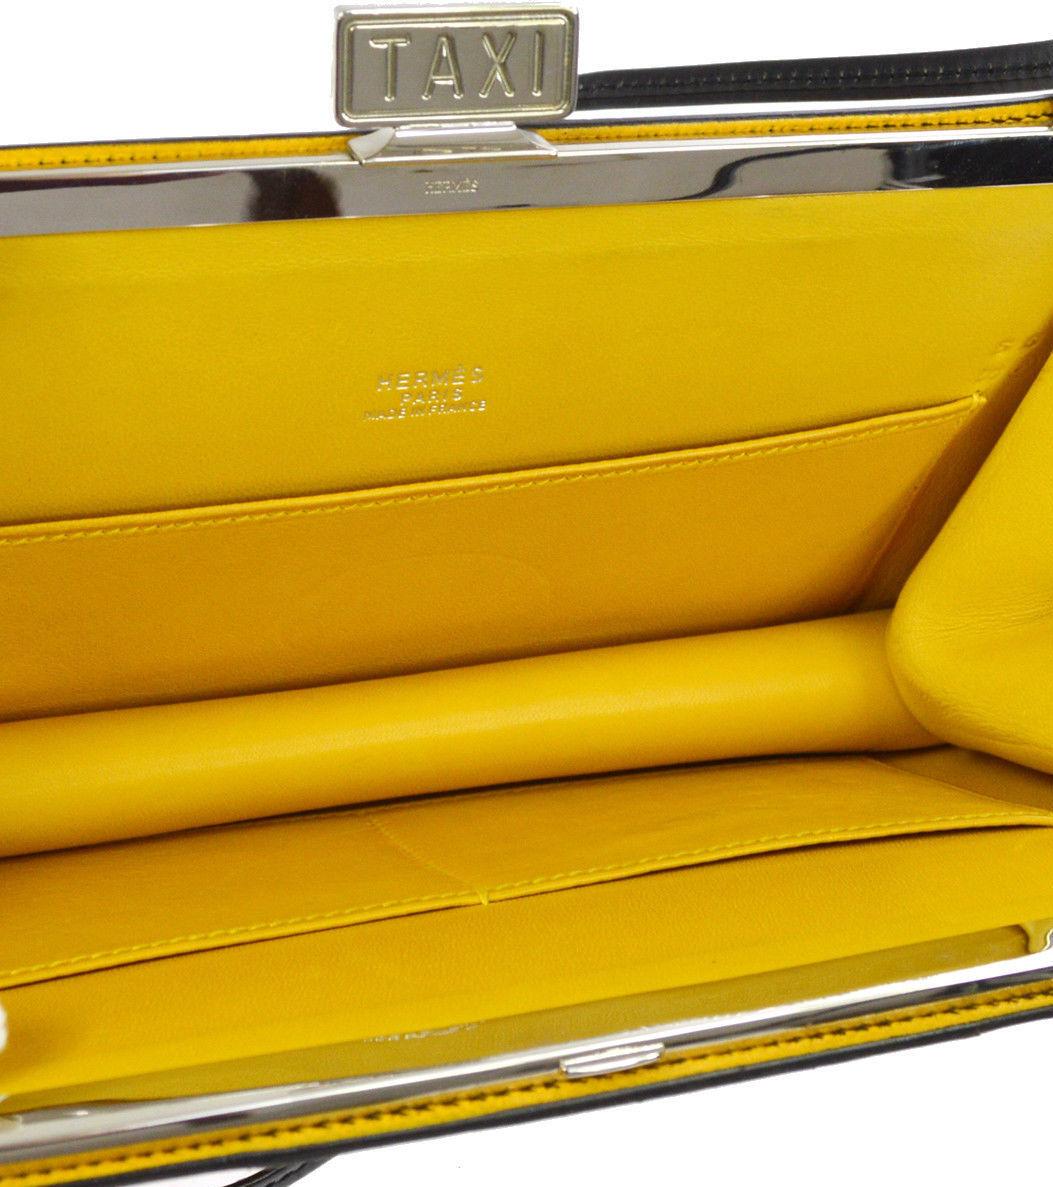 Hermes Rare Leather Yellow Black Taxi 2 in 1 Evening Clutch Shoulder Bag 2